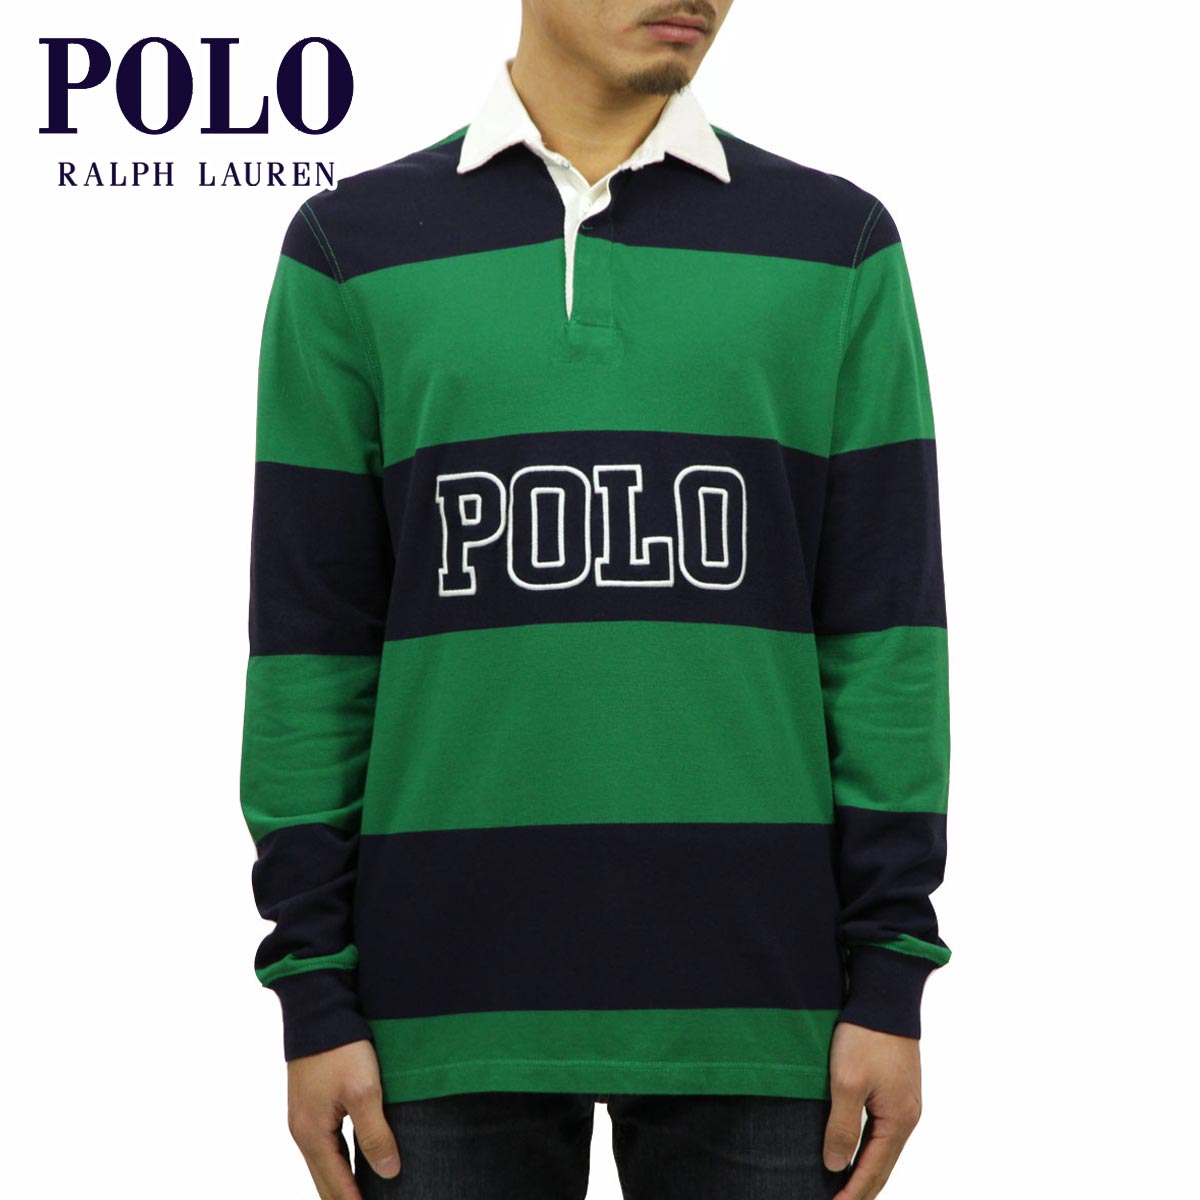 ݥ ե 饬   POLO RALPH LAUREN Ĺµ饬 STRIPED COTTON RUGBY SHIRT